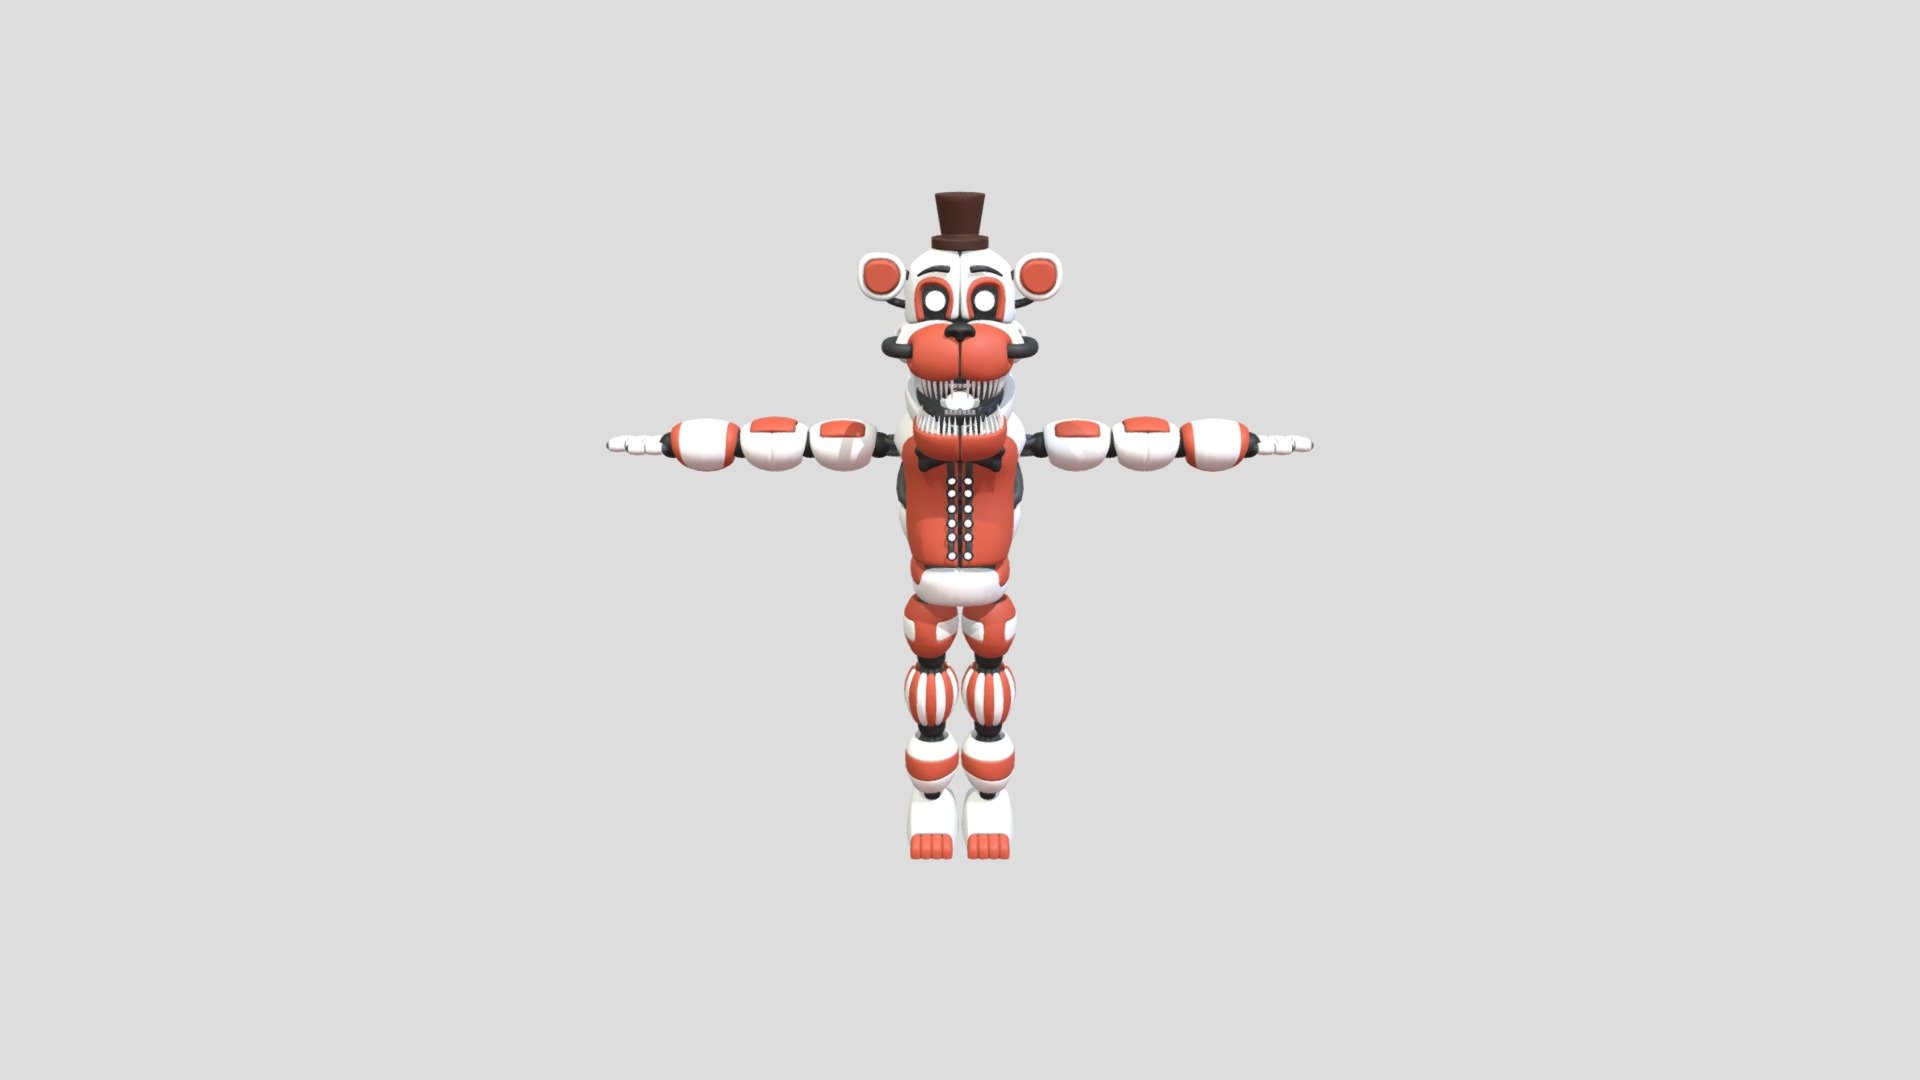 Improved molten freddy - Download Free 3D model by Common_otter86